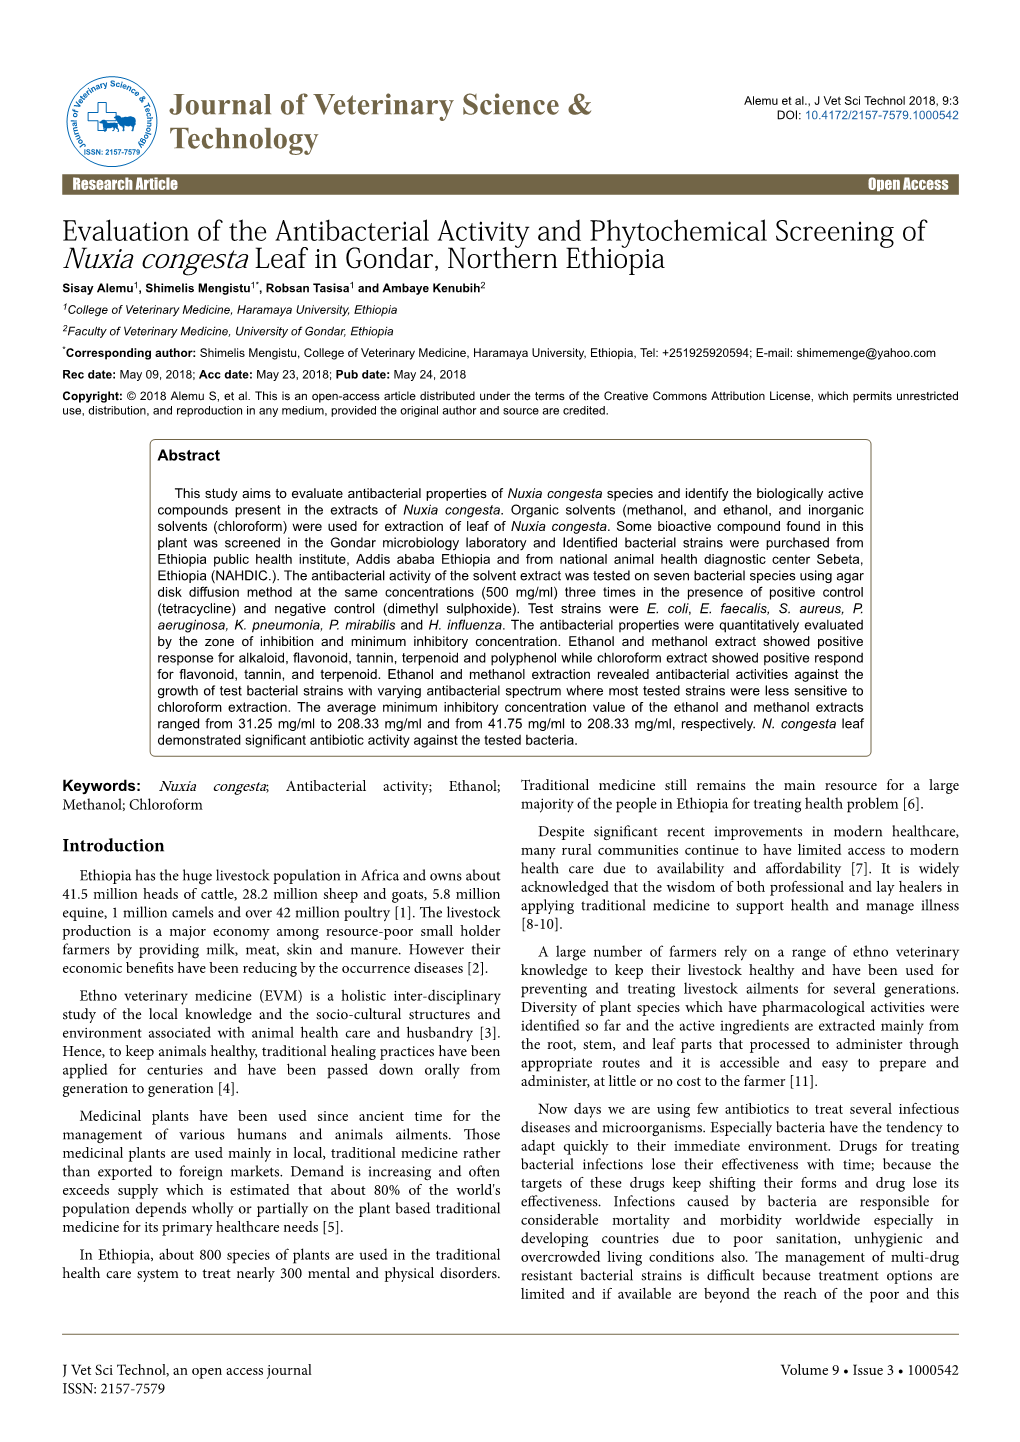 Evaluation of the Antibacterial Activity and Phytochemical Screening Of